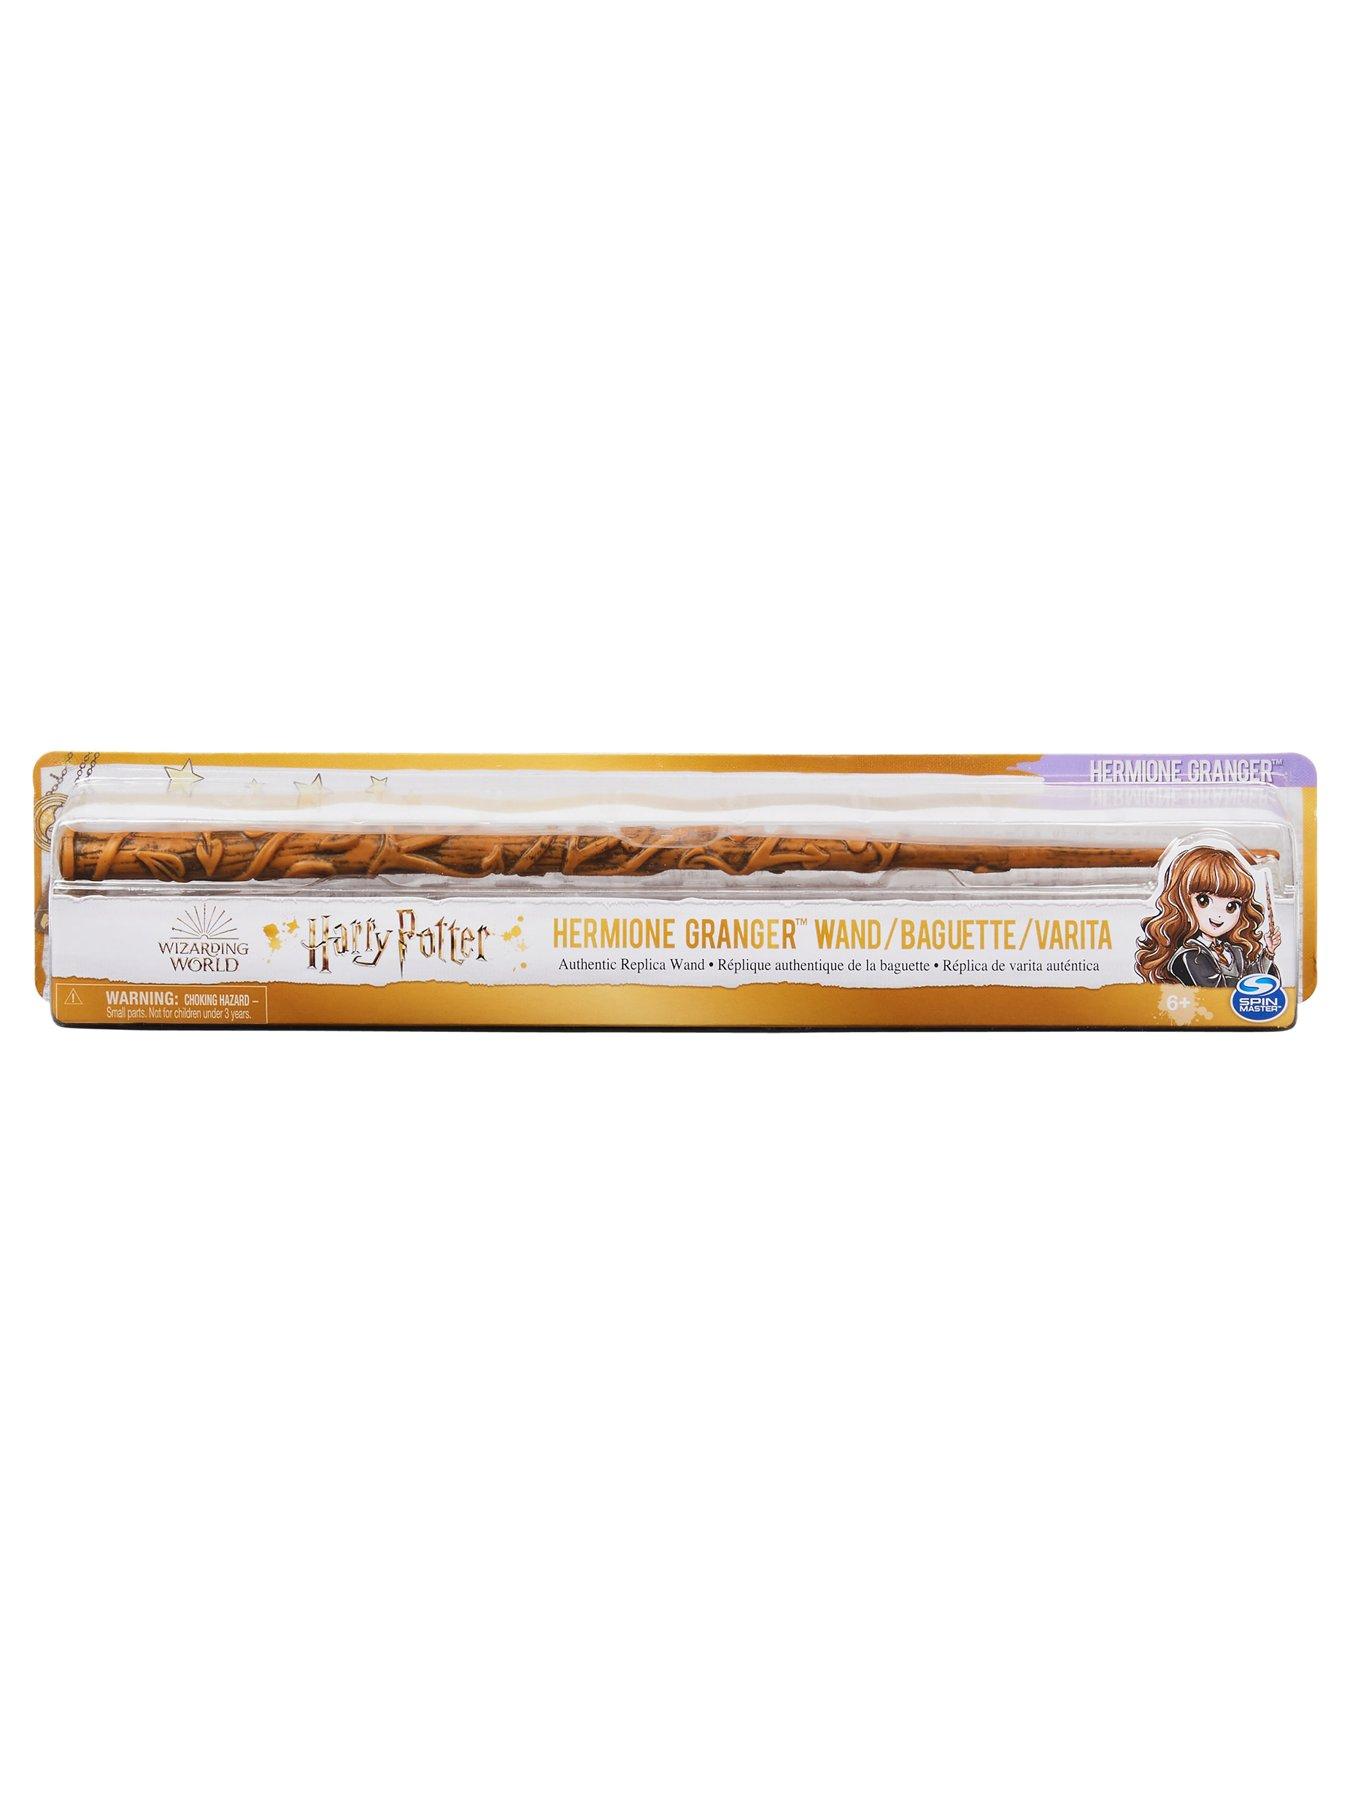 Harry Potter Wizarding World Charming Wands - Hermione